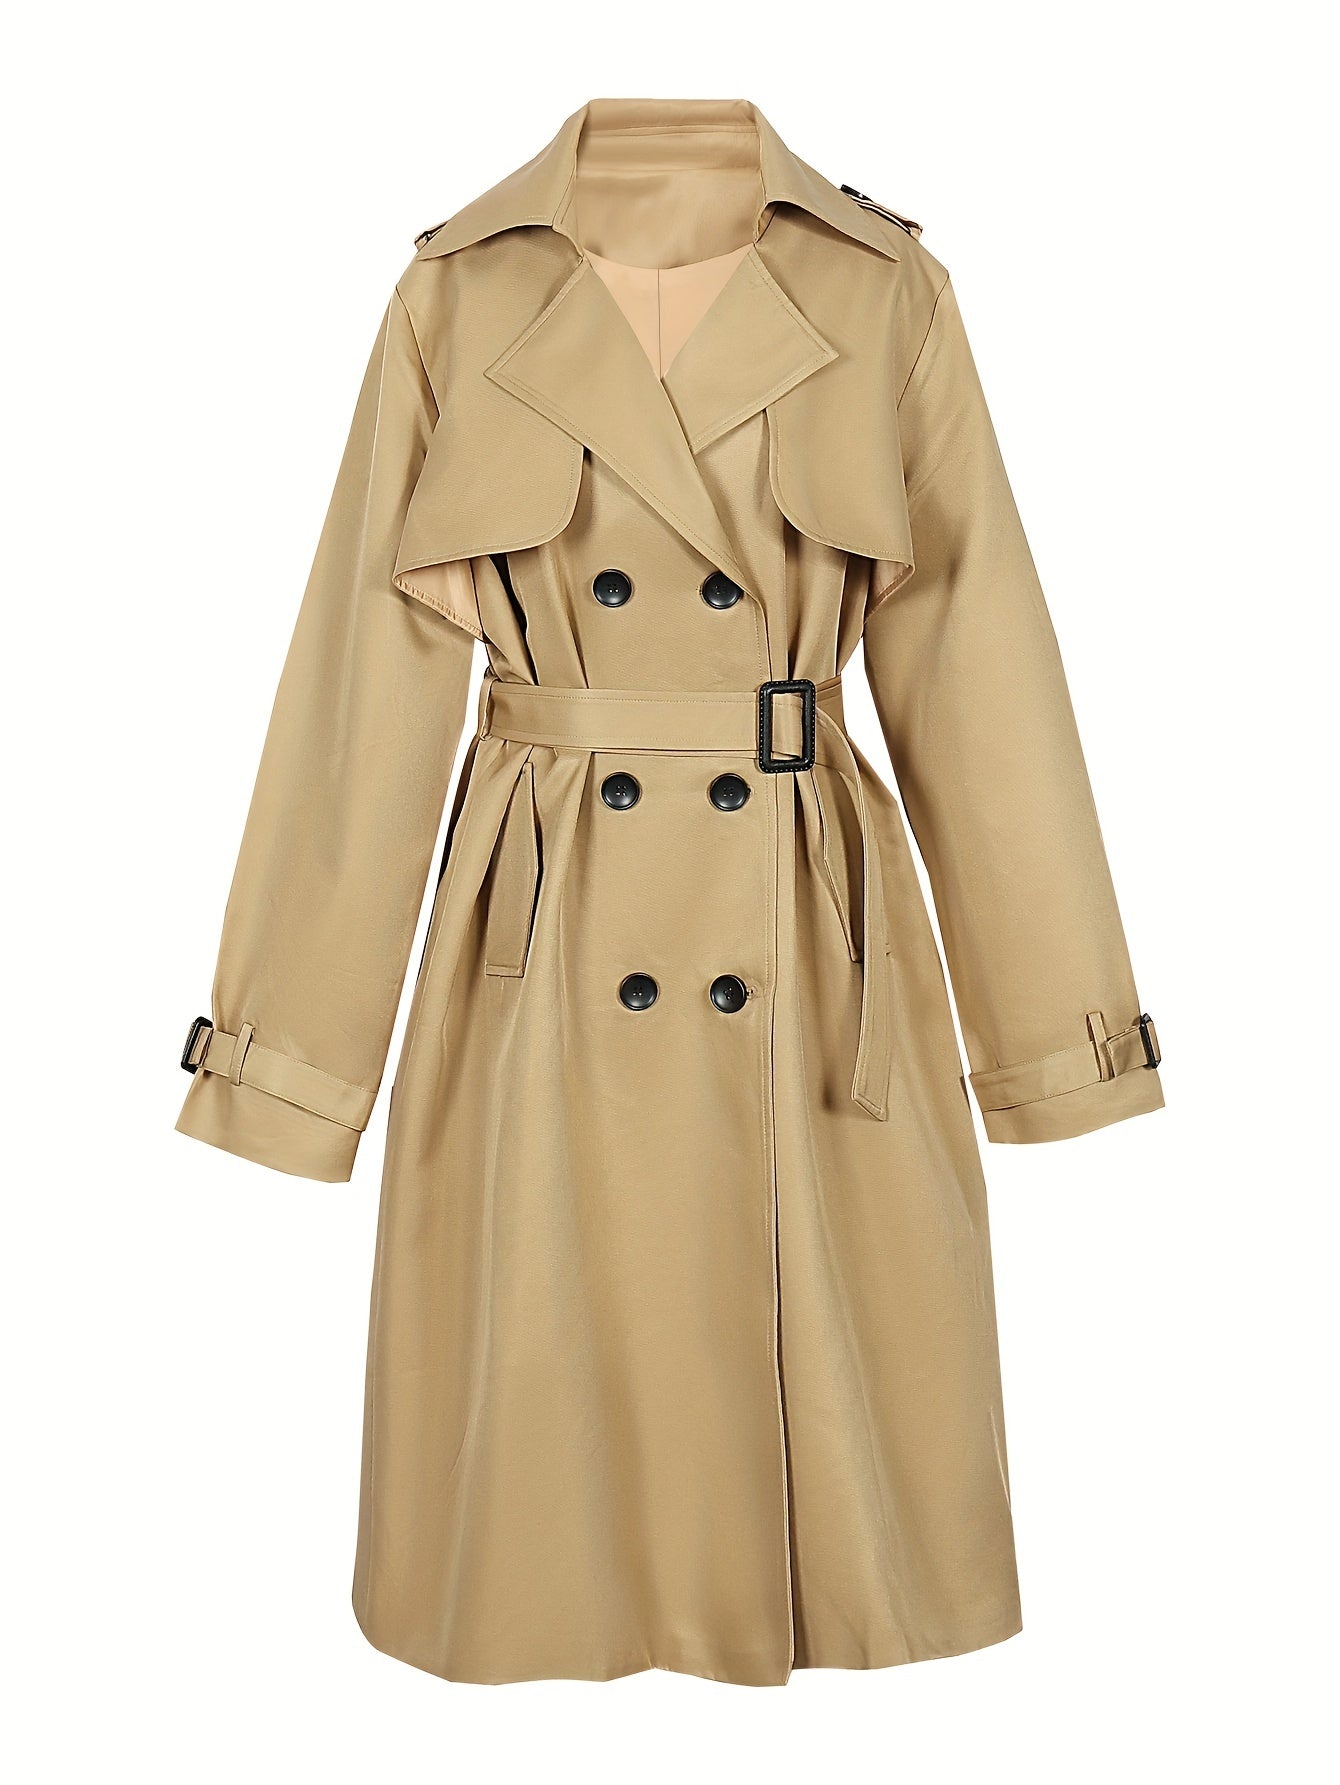 Plus Size Casual Coat, Women's Plus Solid Long Sleeve Lapel Collar Double Button Buckle Overcoat With Belt